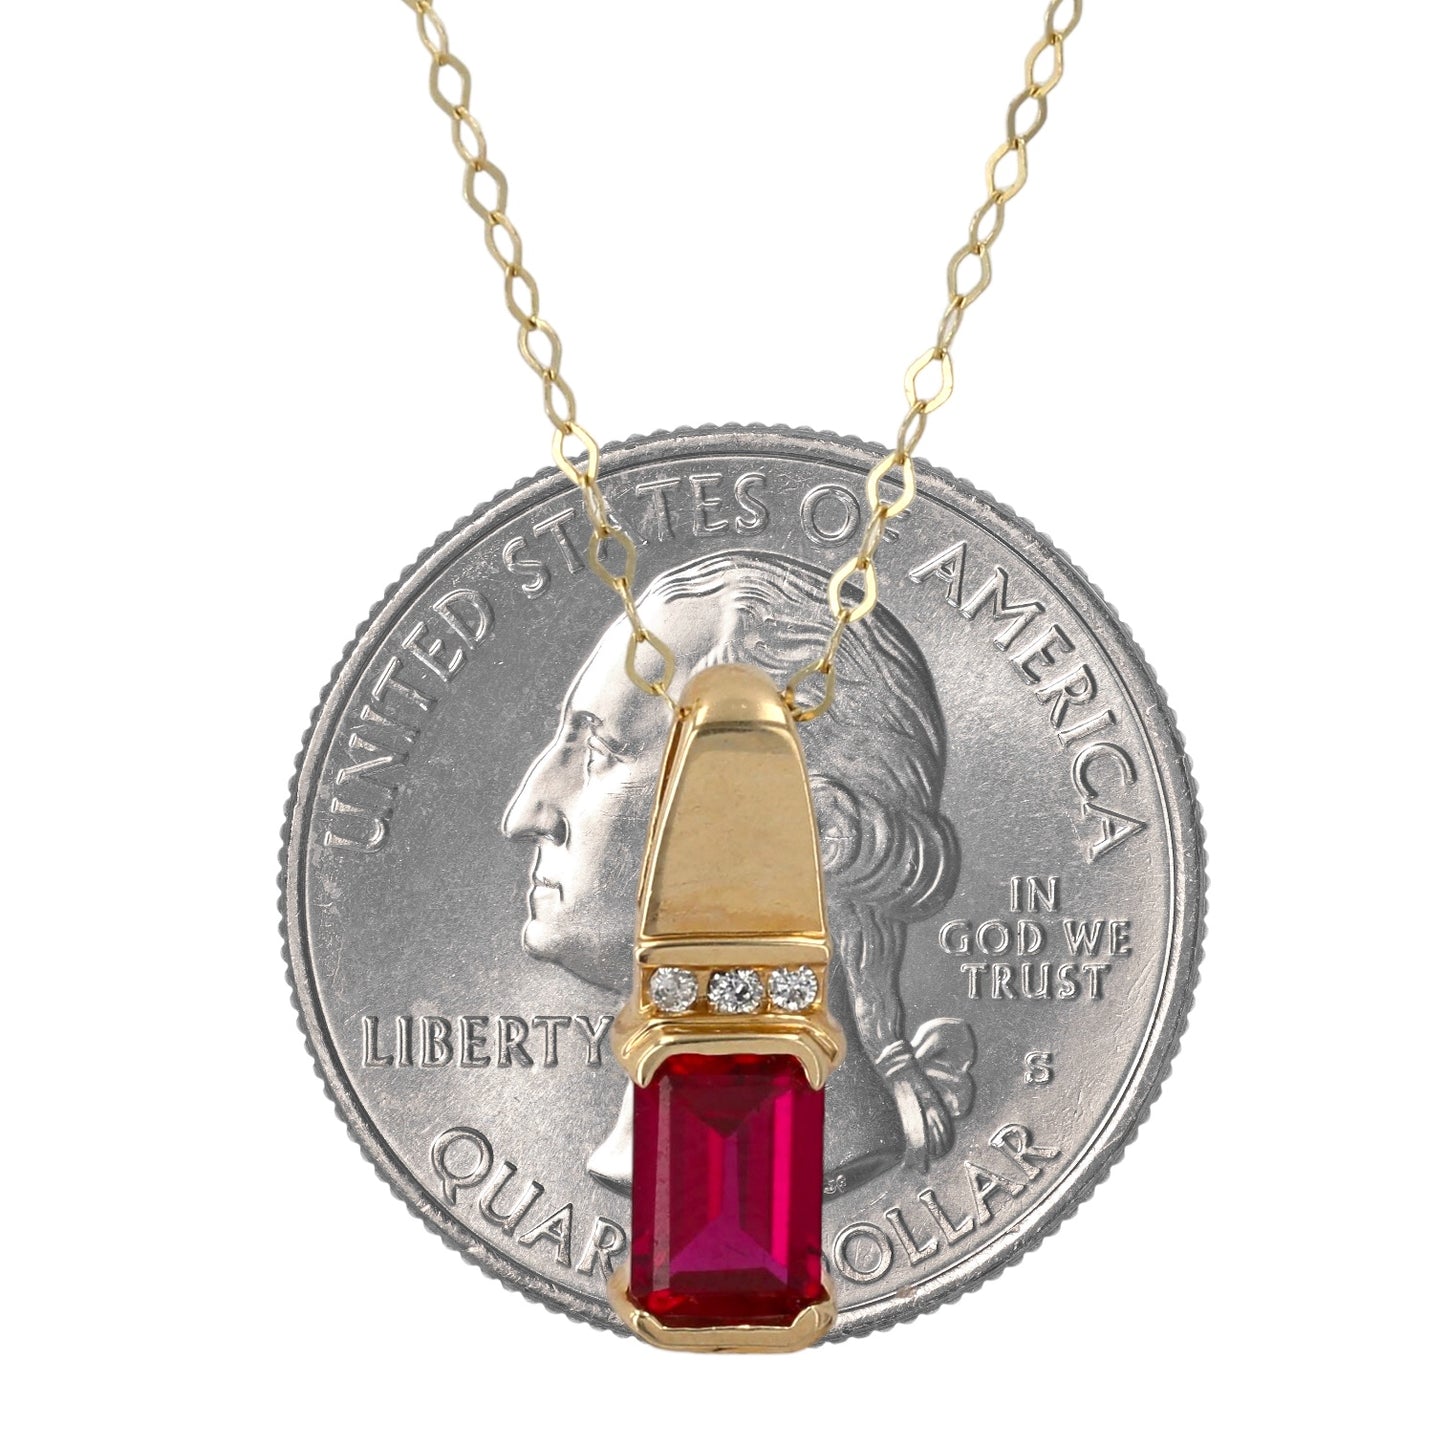 10K Yellow gold ruby diamonds accent Necklace-17728